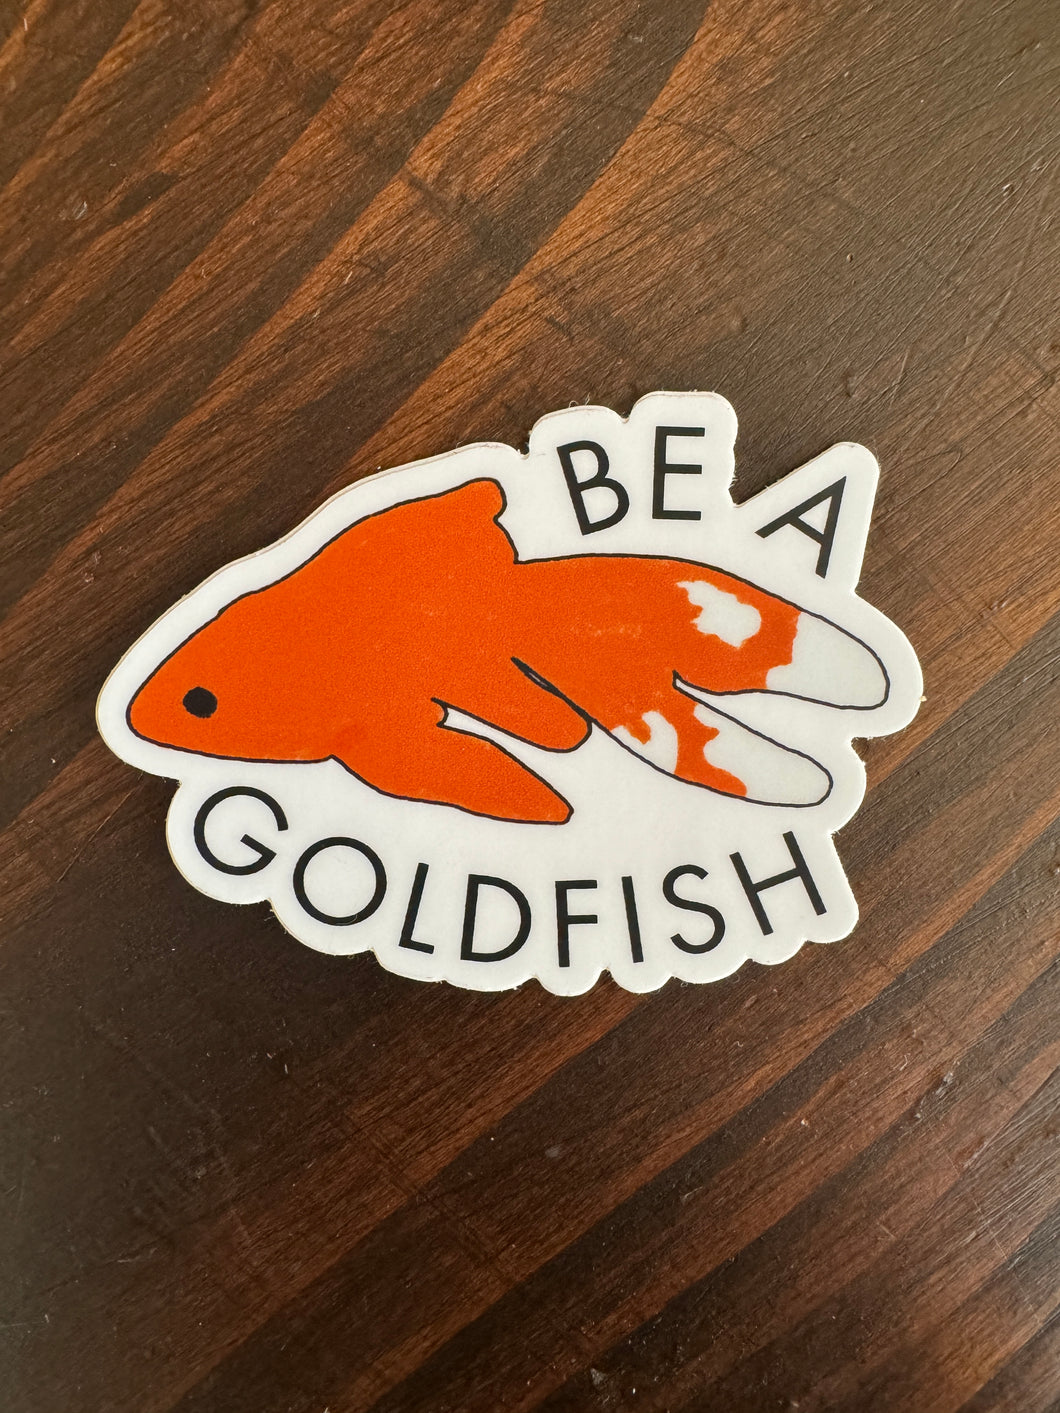 Be a goldfish ted lasso 3